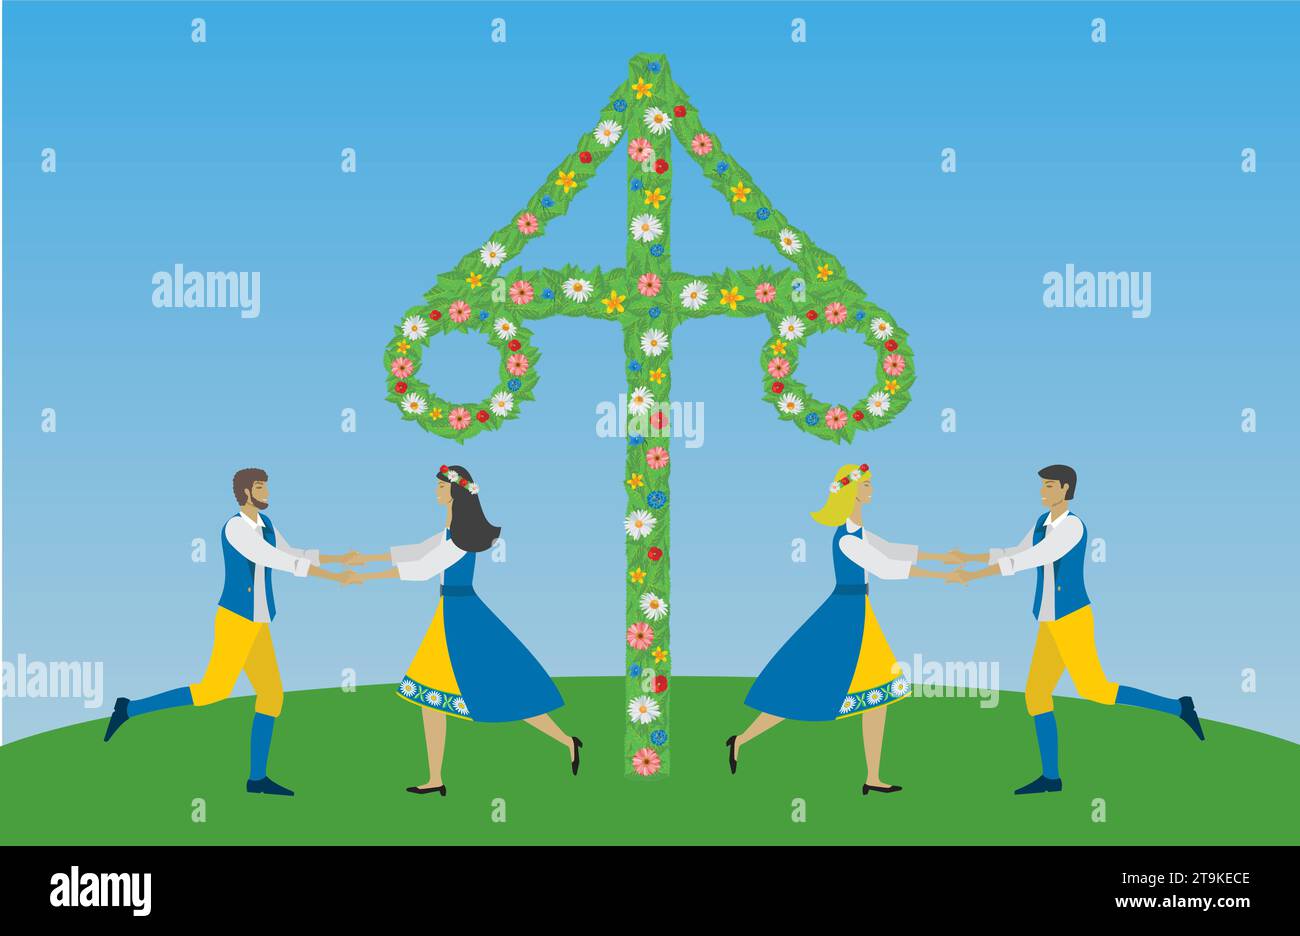 Midsummer dance. Celebration in Sweden in june with dance around may pole. People dressed in traditional Swedish clothes. Vector illustration. Stock Vector